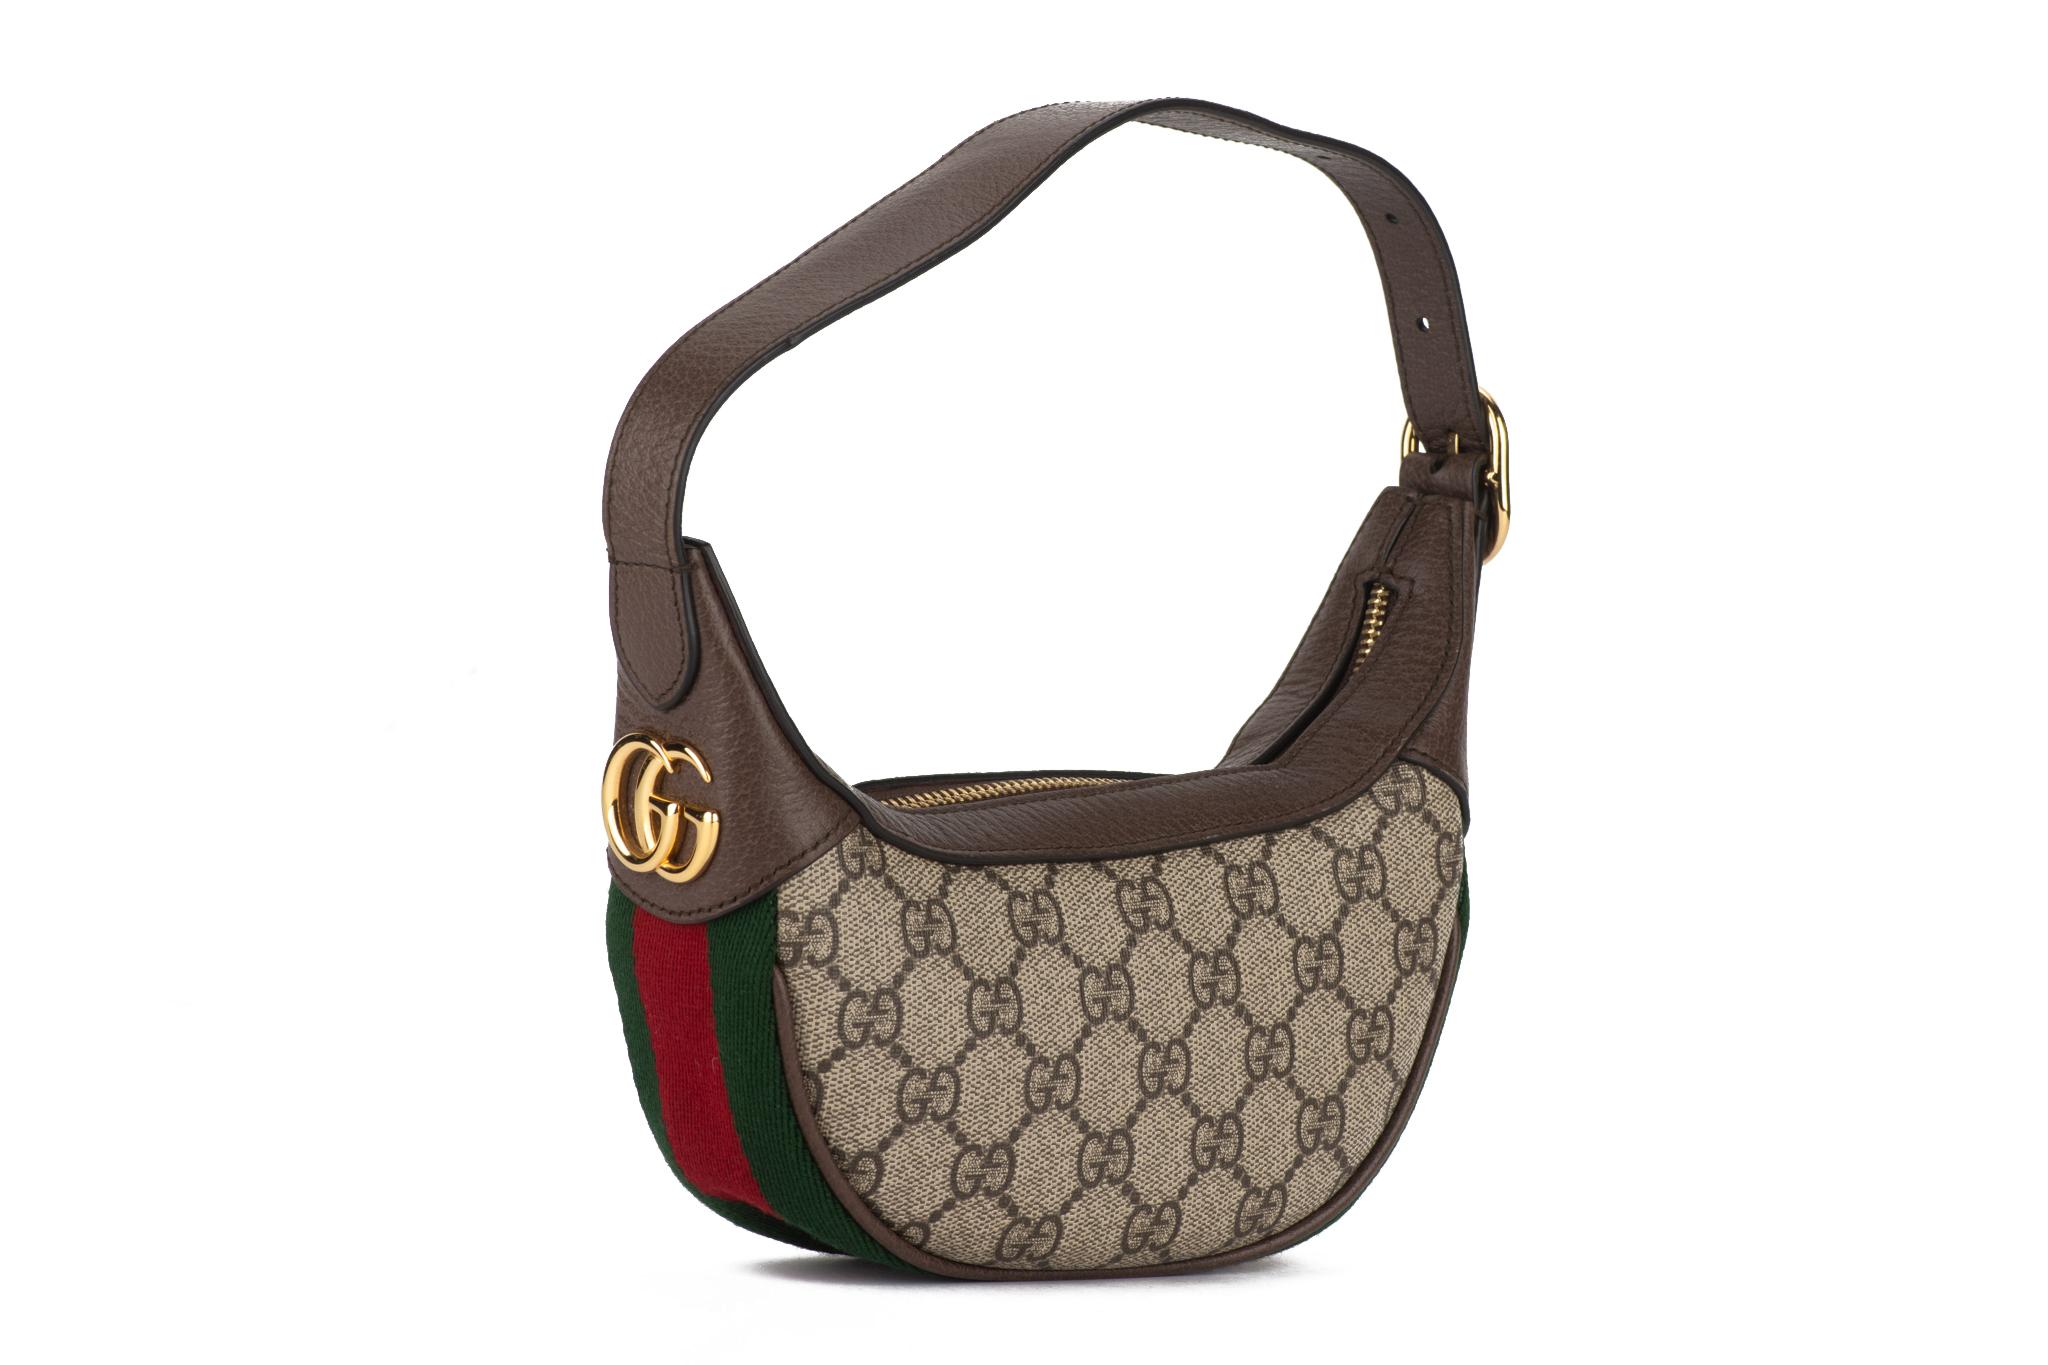 Gucci mini Ophidia half moon bag with gg classic canvas print, brown leather trim and gold tone hardware. Perfect exterior, minimum wear on interior. 
Adjustable shoulder strap drop 6”. 
Comes with original dustcover and box.